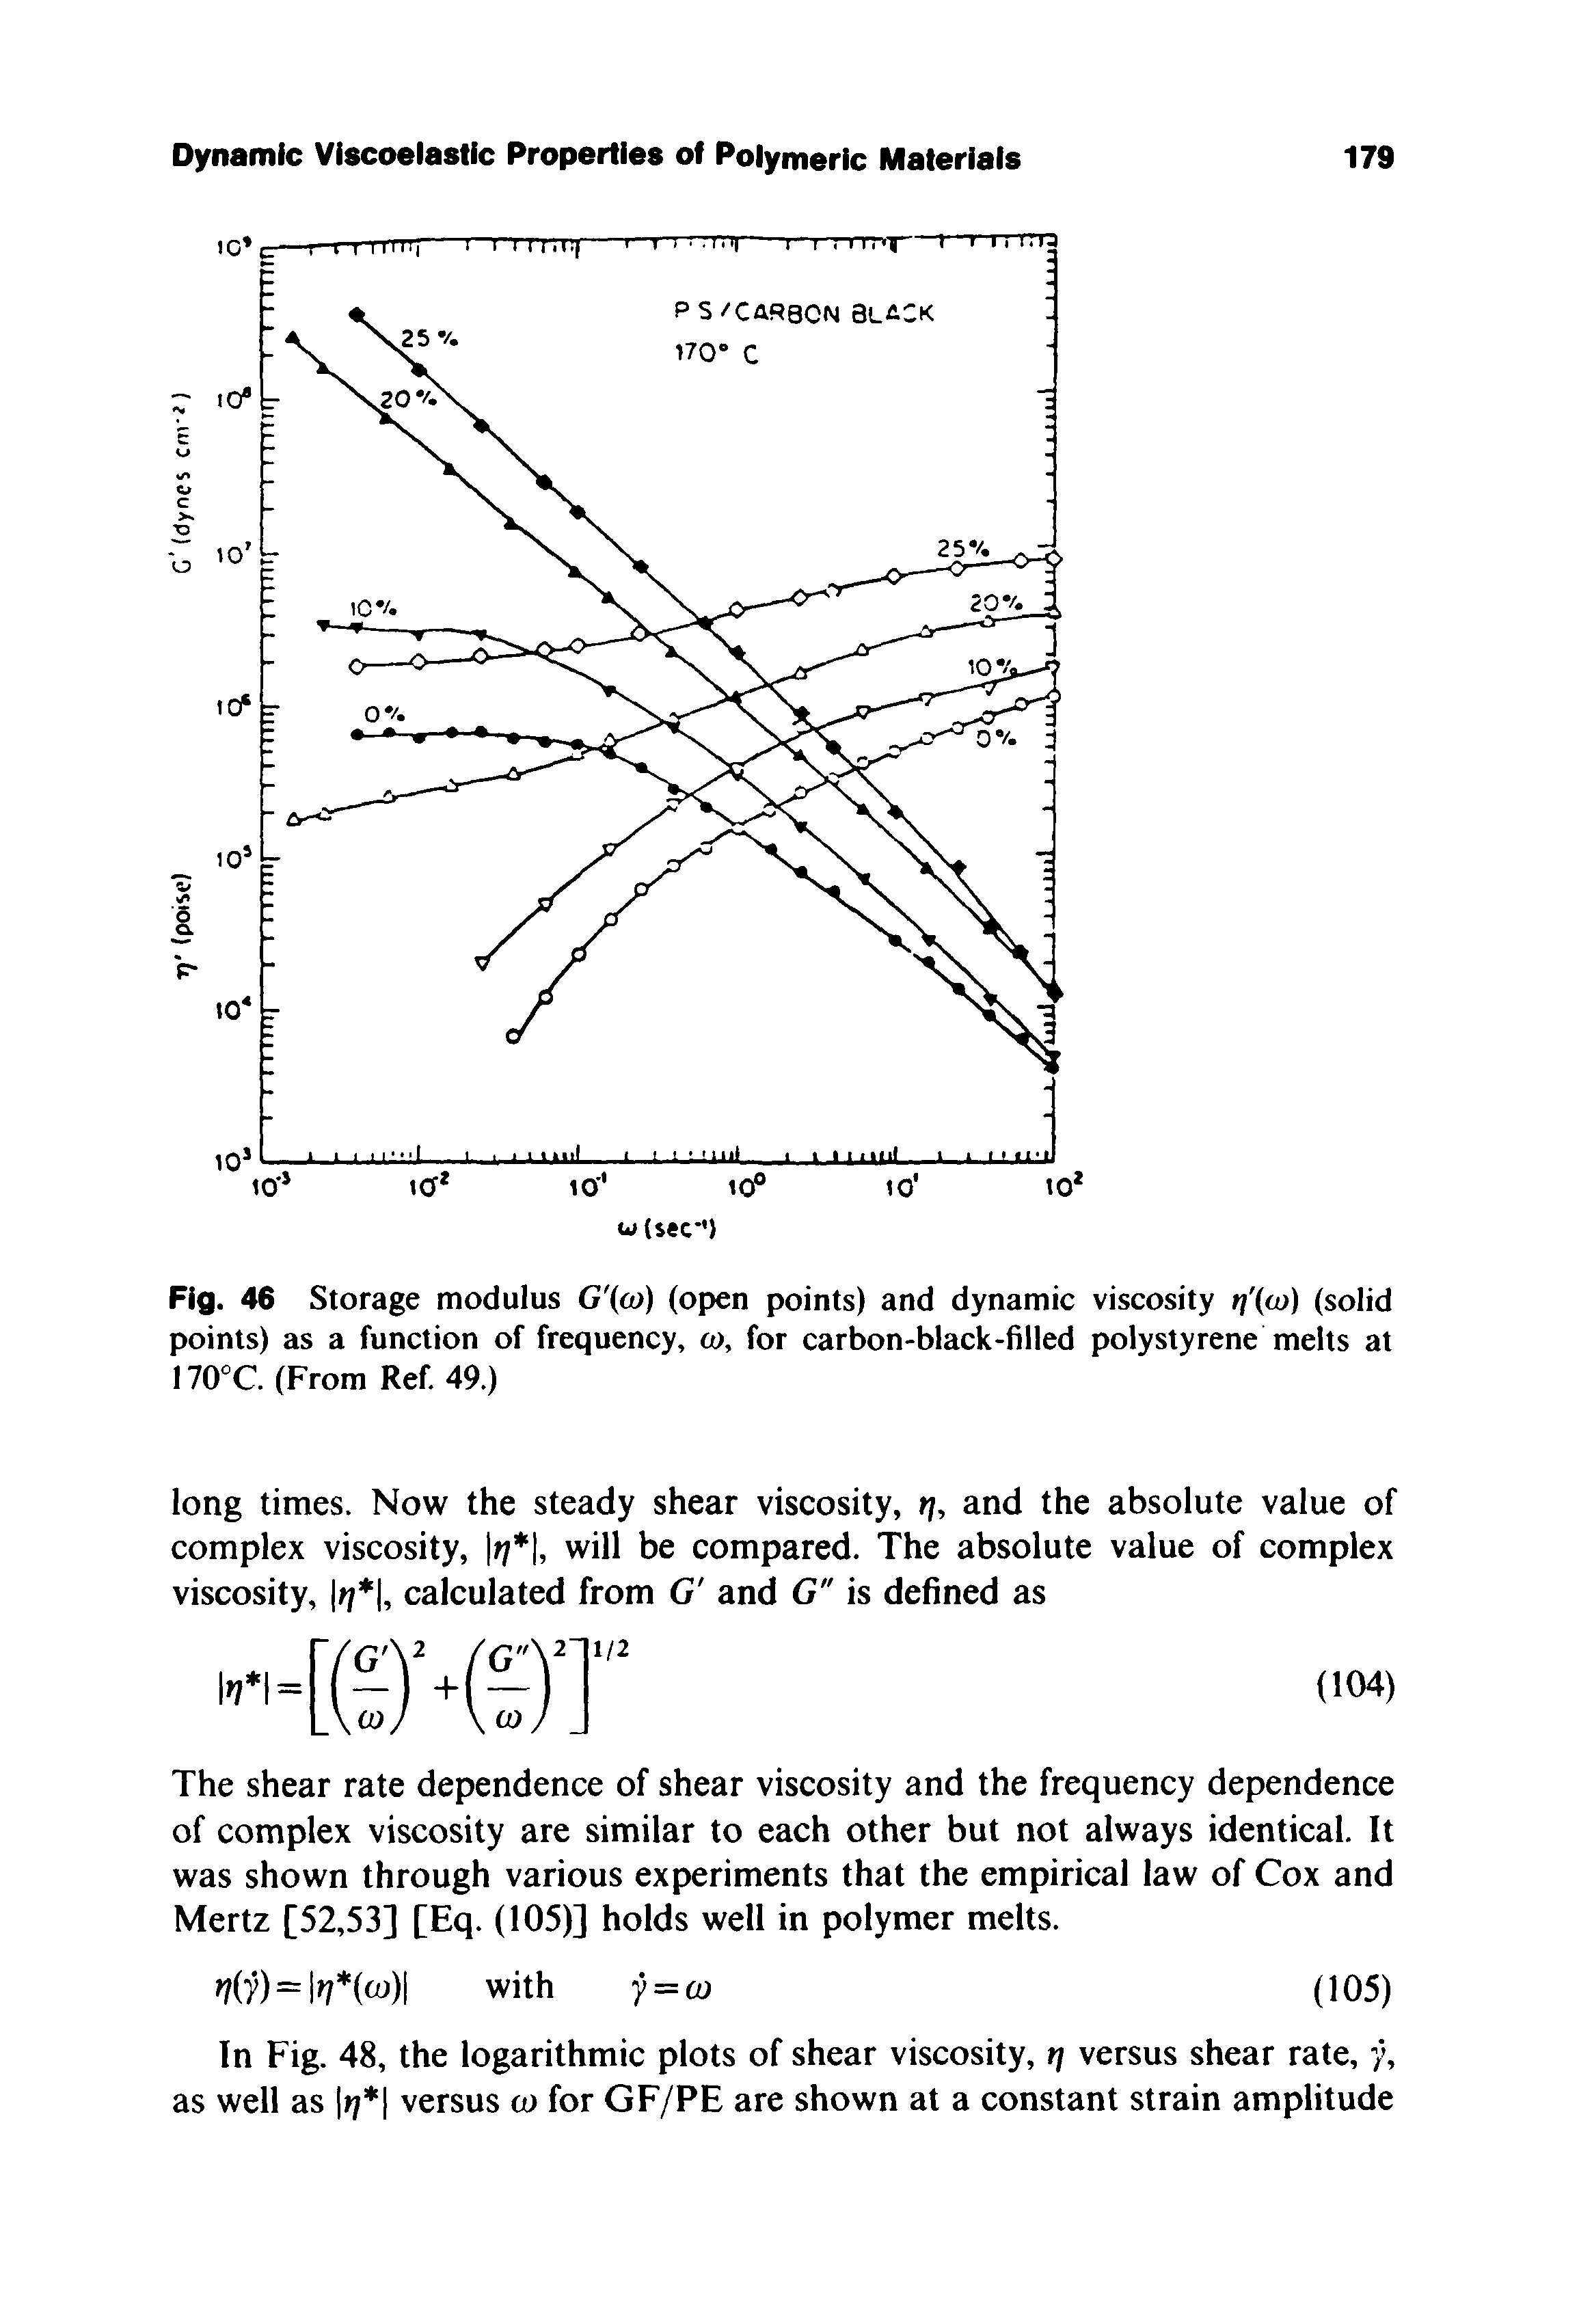 Fig. 46 Storage modulus G o)) (open points) and dynamic viscosity (solid points) as a function of frequency, co, for carbon-black-filled polystyrene melts at 170°C. (From Ref. 49.)...